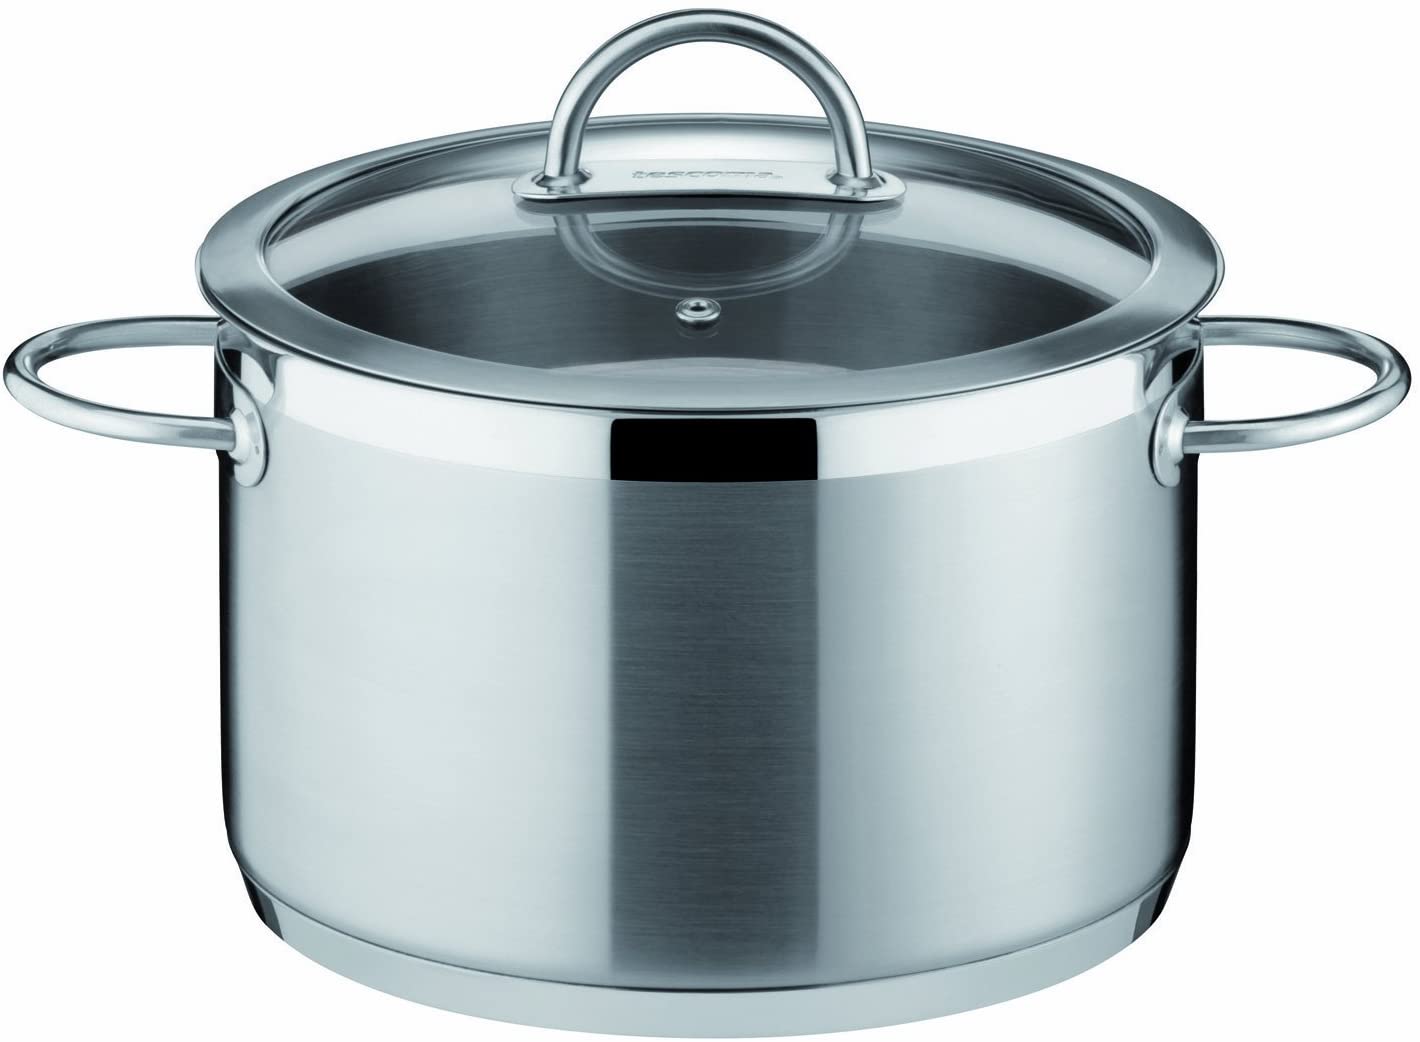 Tescoma Vision 16 cm/ 2 Litre Deep Pot with Cover